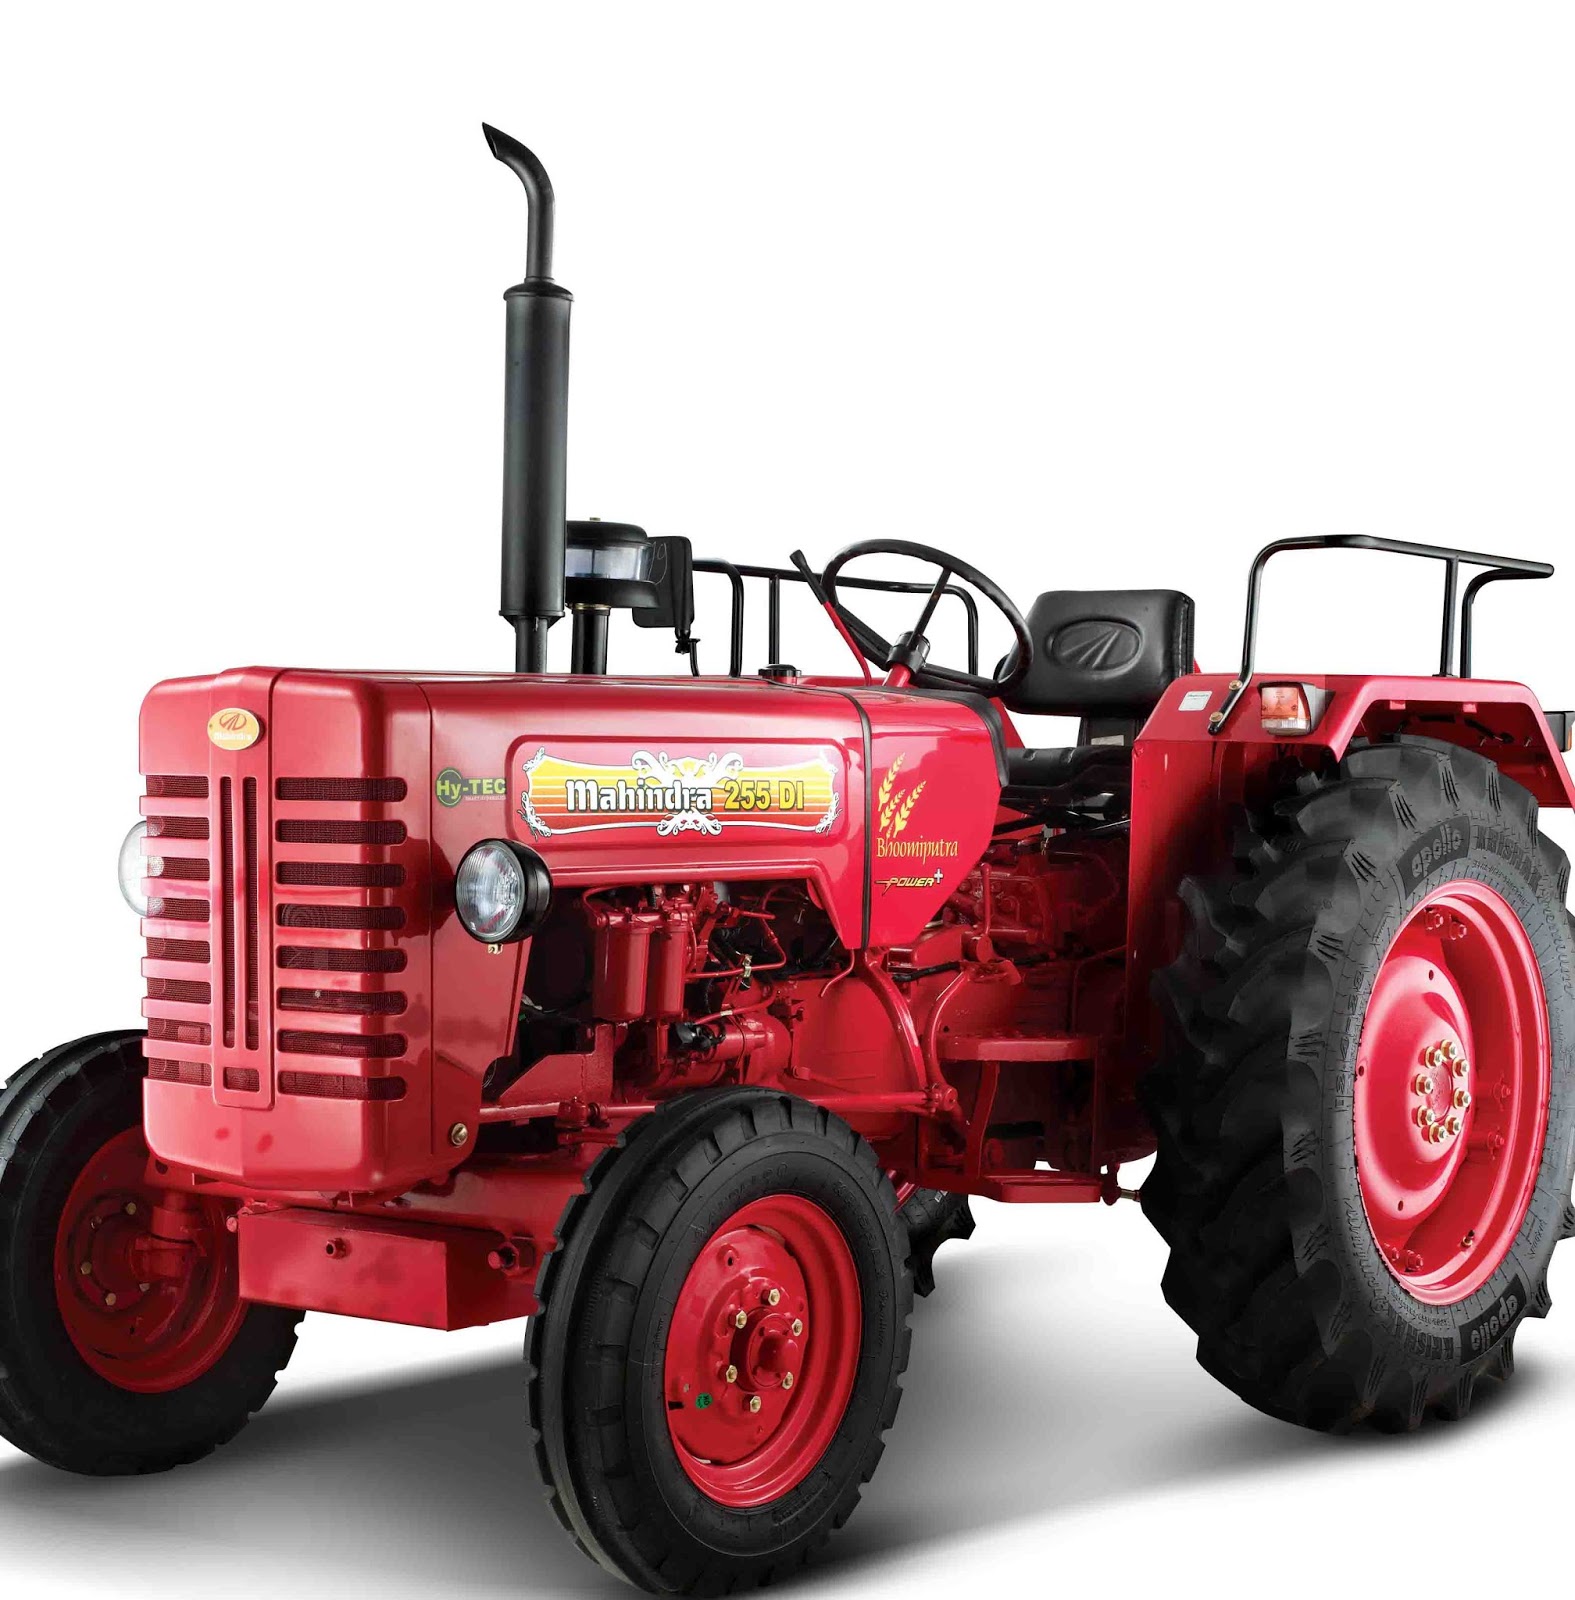 mahindra-255-di-power-plus-tractor-price-in-india-mileage-features